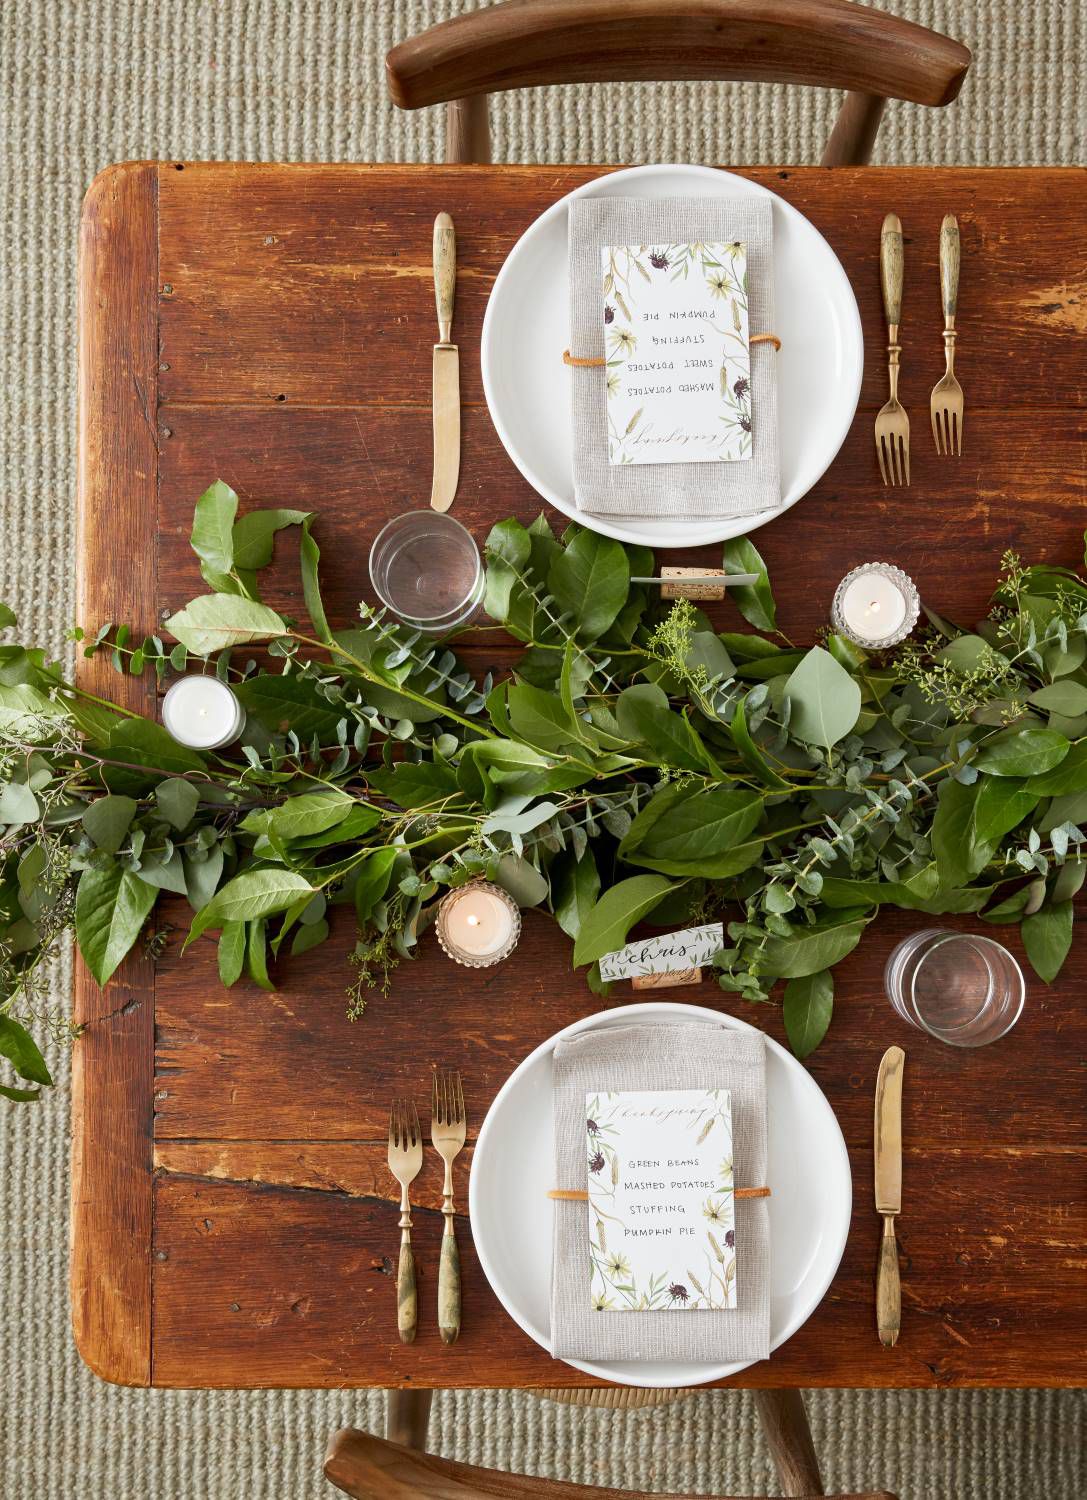 How To Make a Fresh Greenery Table Garland